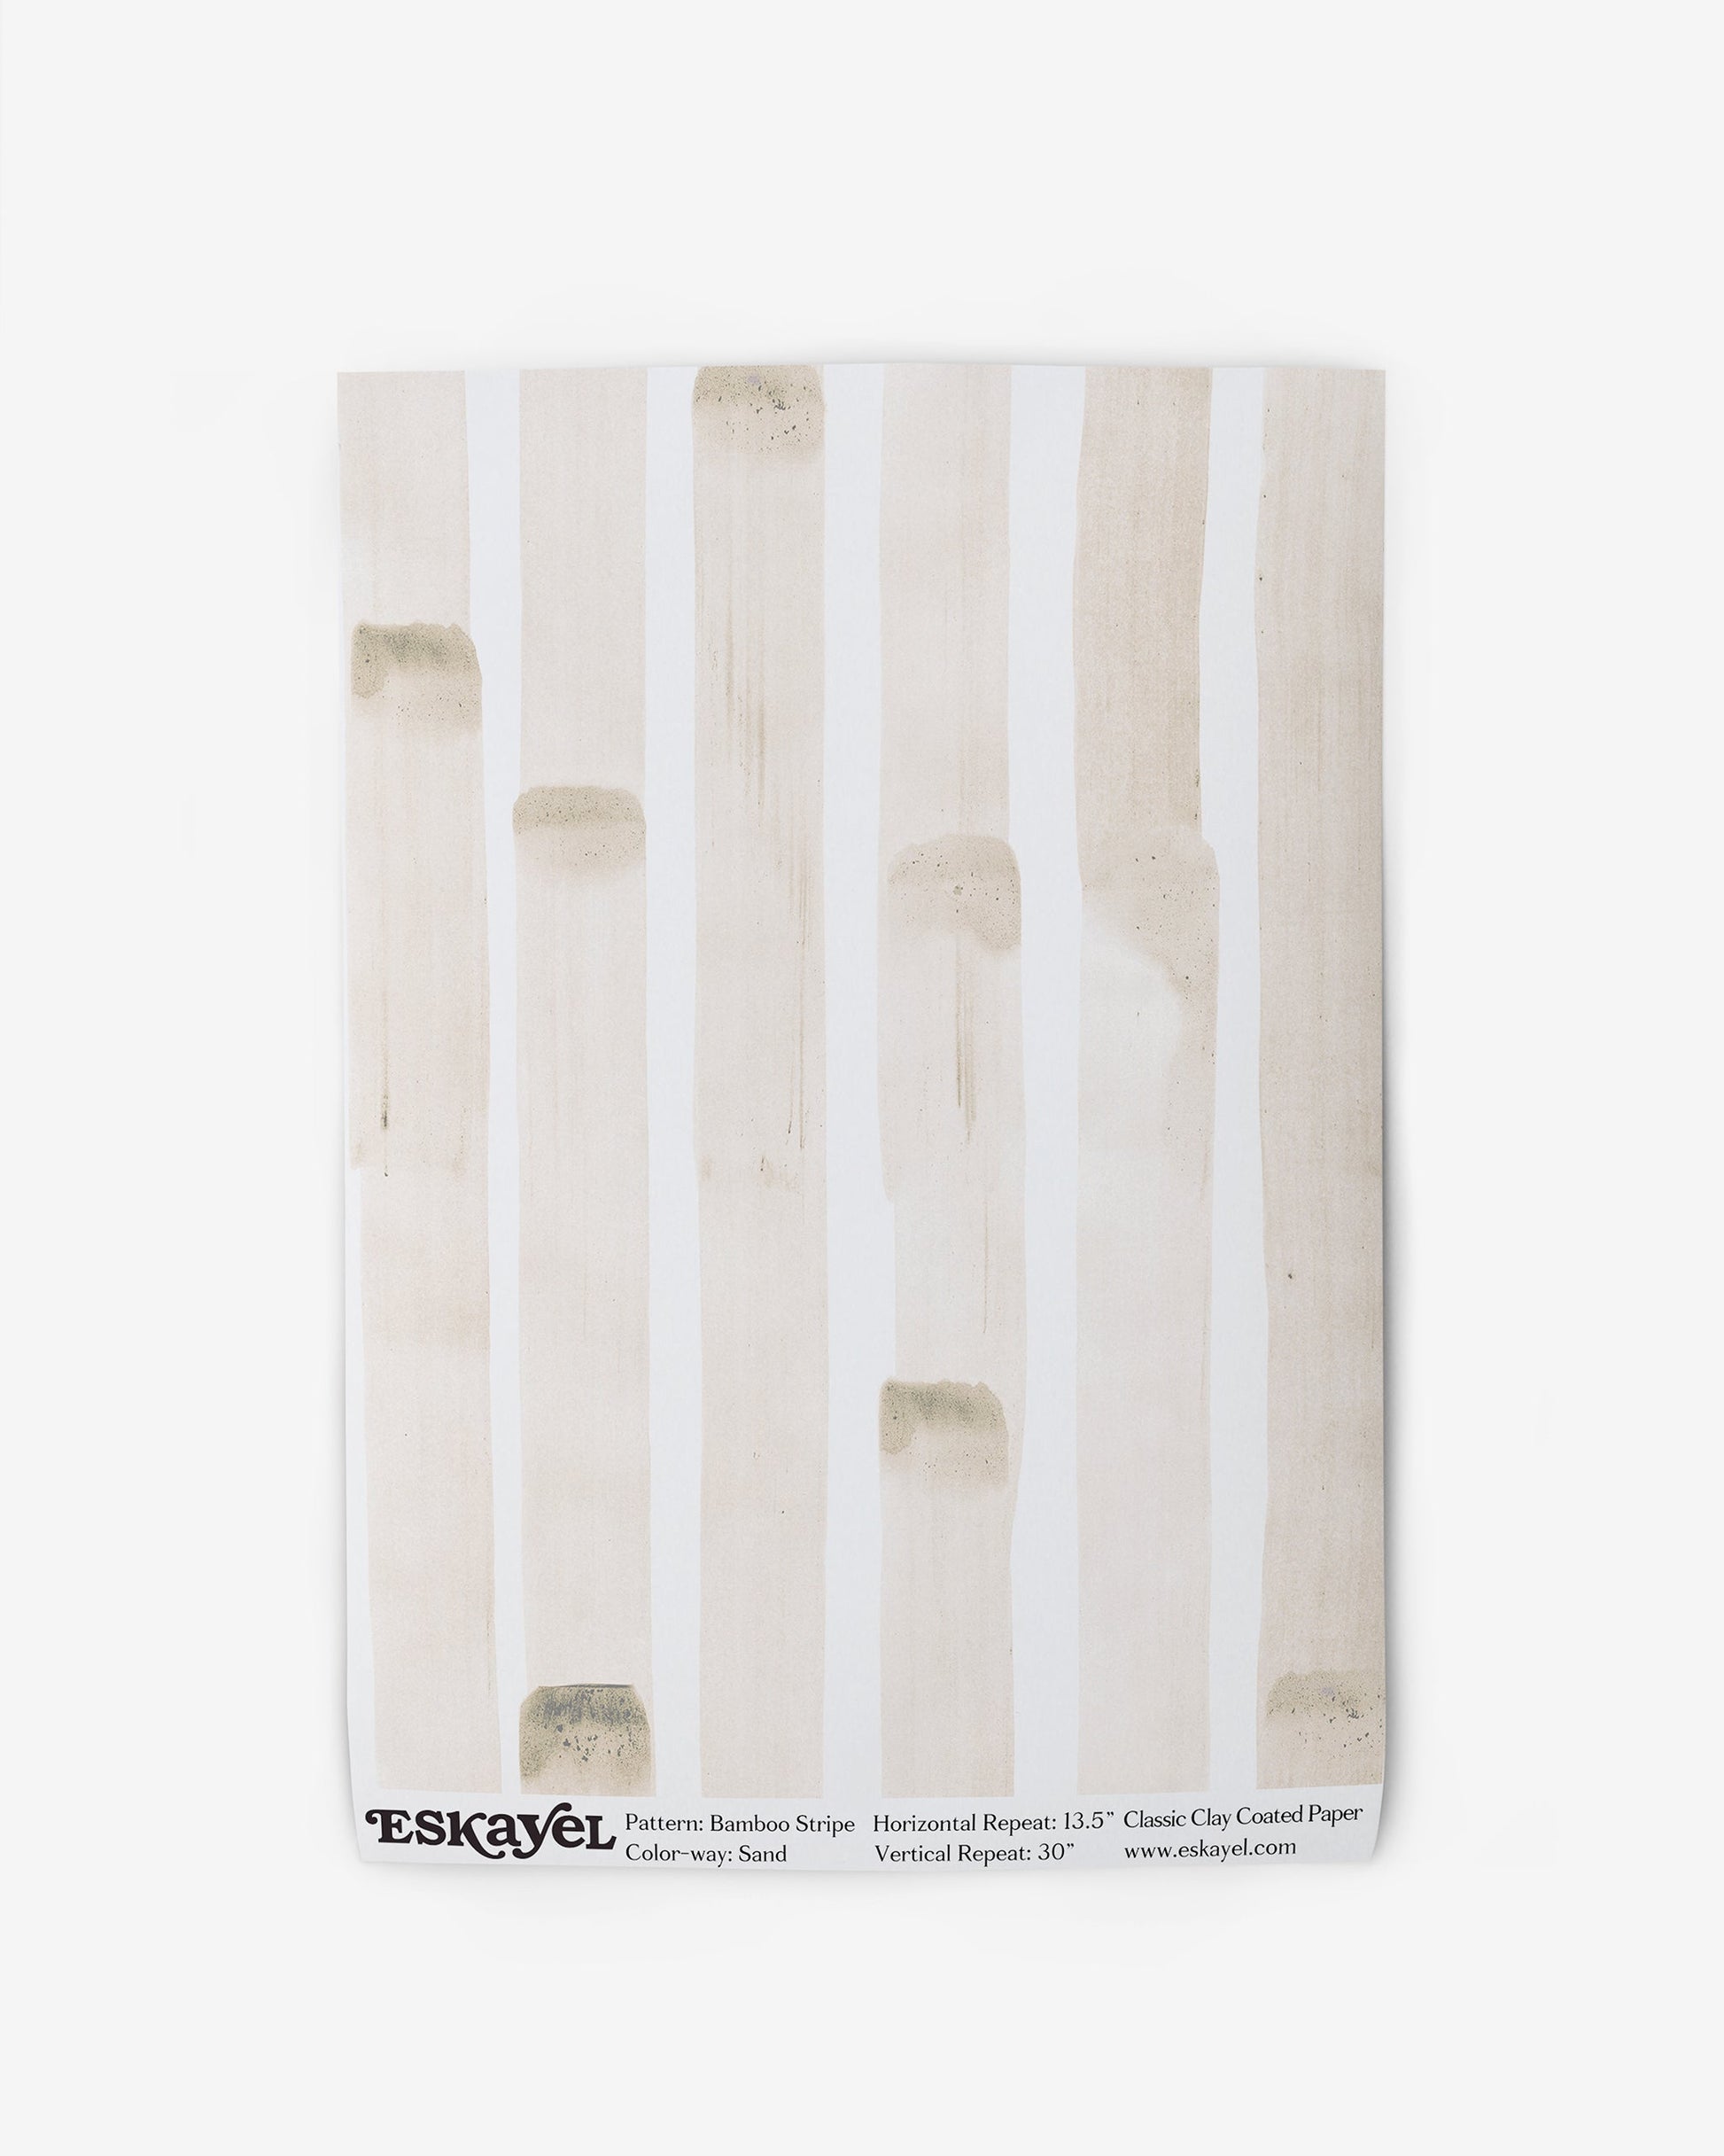 A white towel with a beige stripe from the Bamboo Stripe Wallpaper||Sand range.